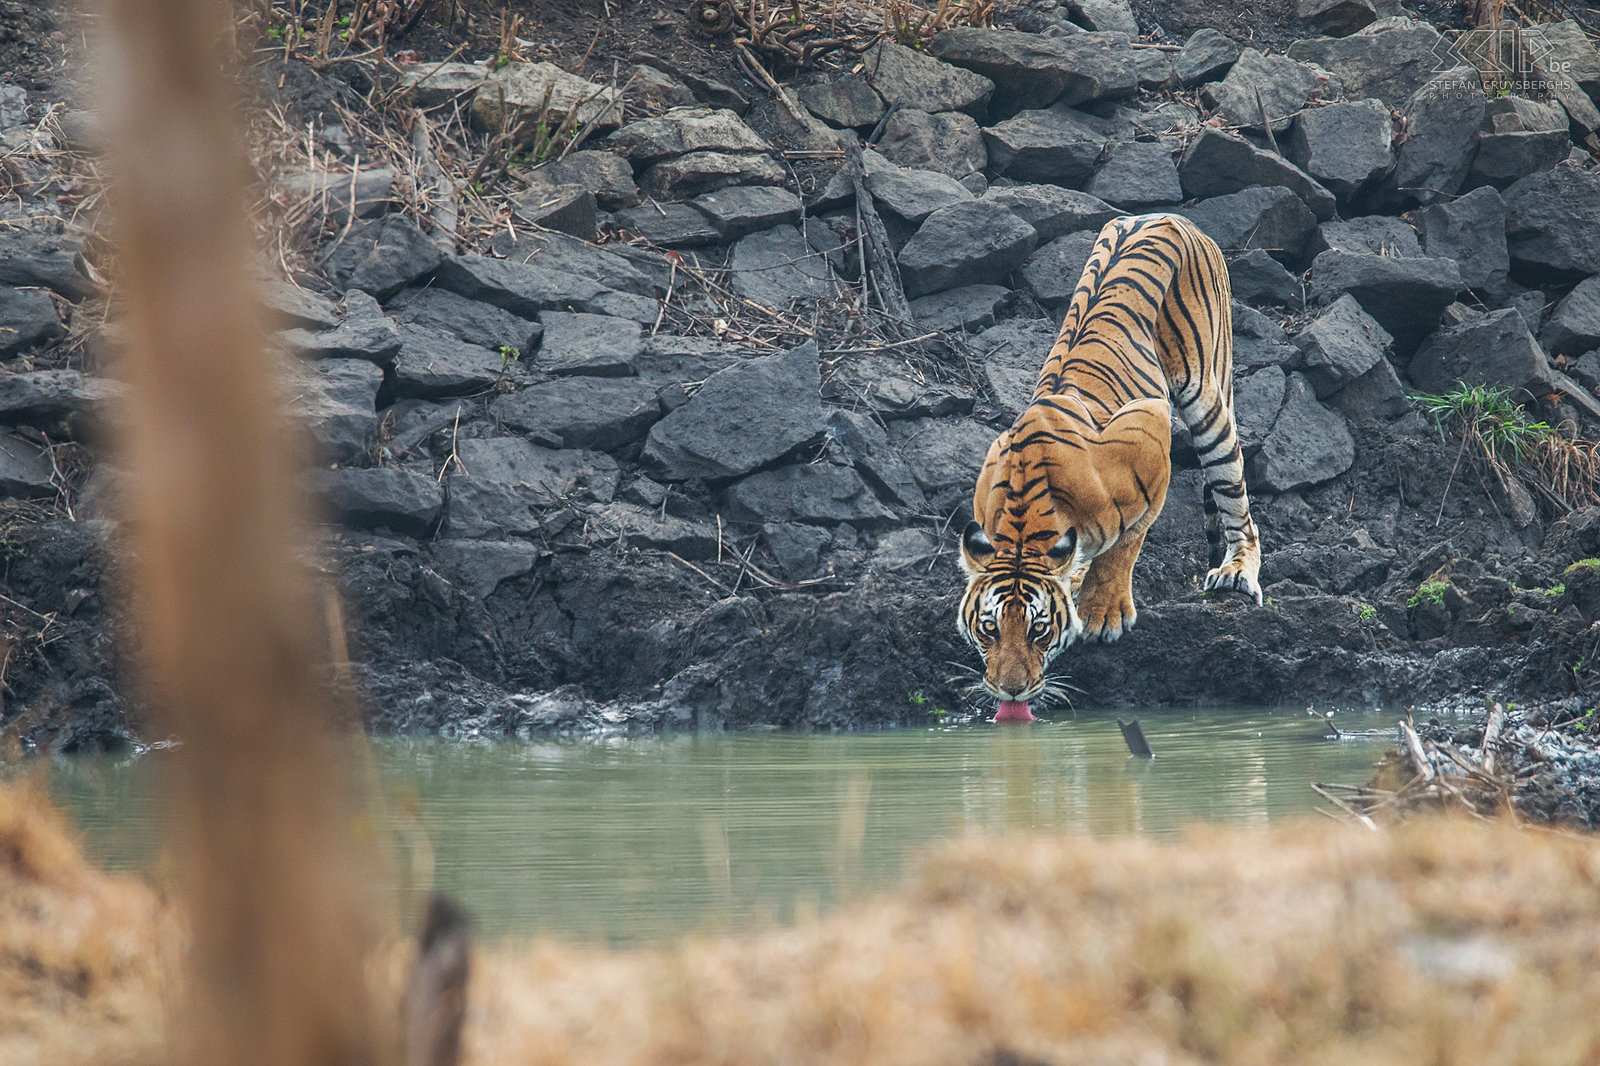 Kabini - 'Tiger tank female' This tigress came down to the waterpool to drink and finally she went into the water to cool down. It is not easy to spot this wonderful animal in the wild. The Kabini region in Nagarhole national park is probably one of the best locations in southern India to see a tiger. Stefan Cruysberghs